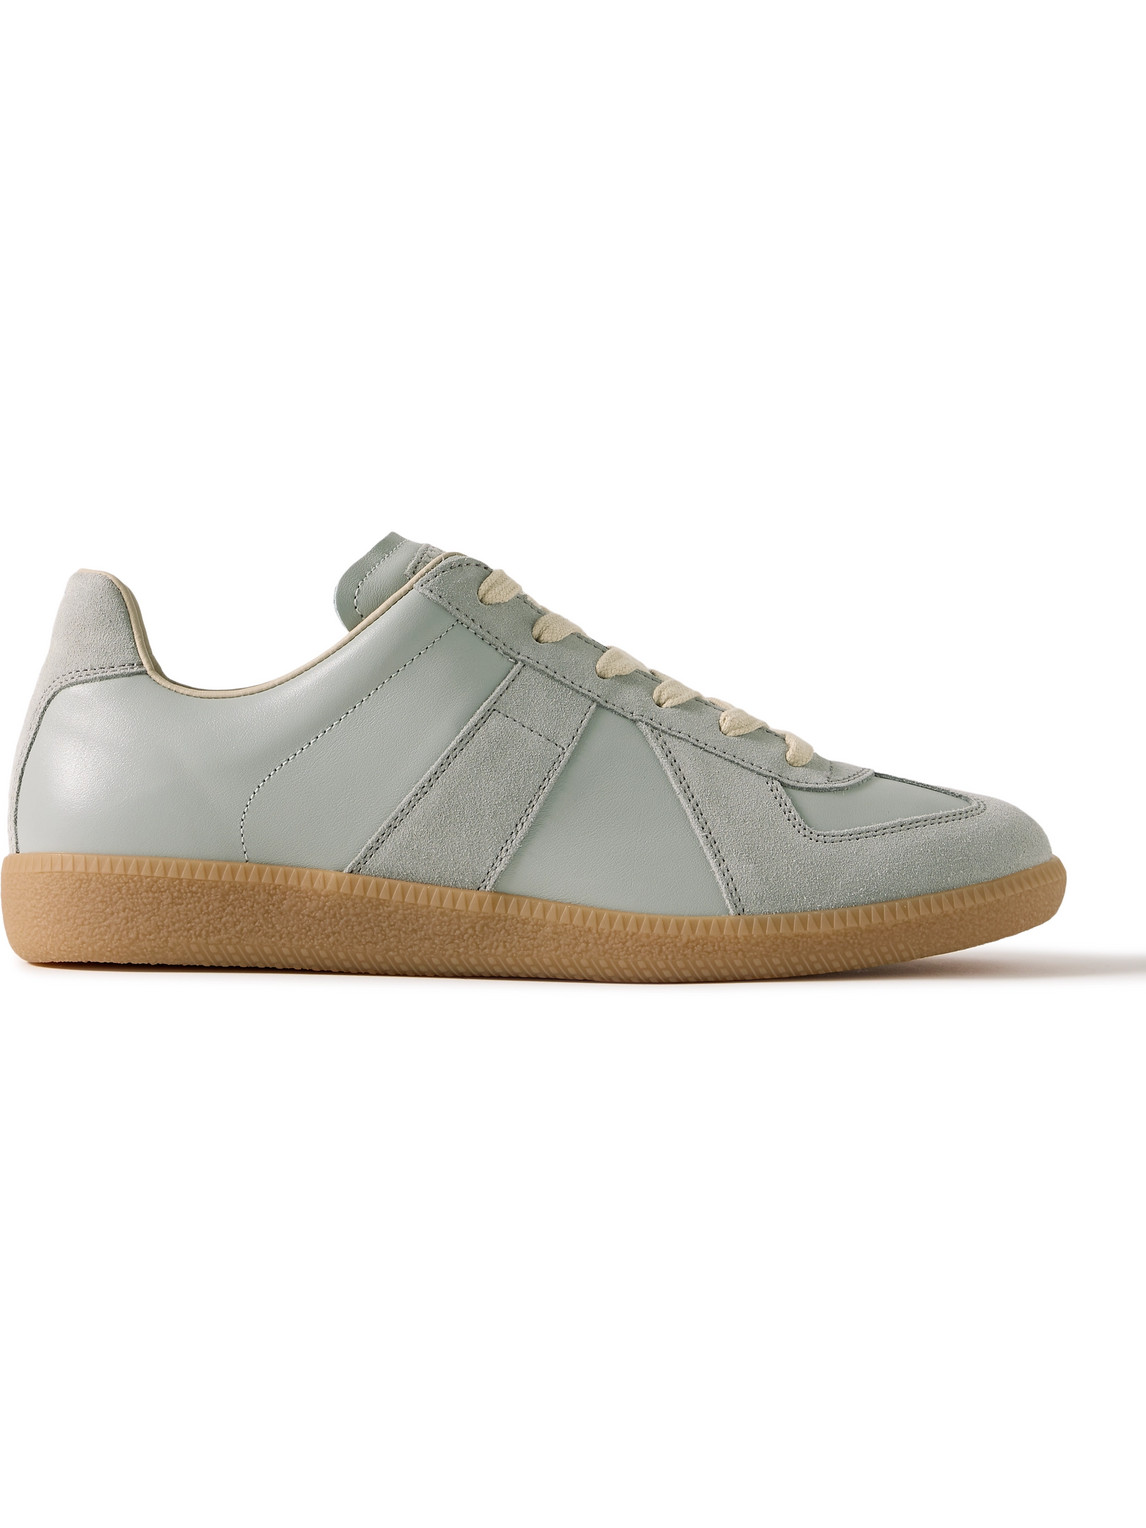 Maison Margiela Replica Leather And Suede Sneakers In Gray